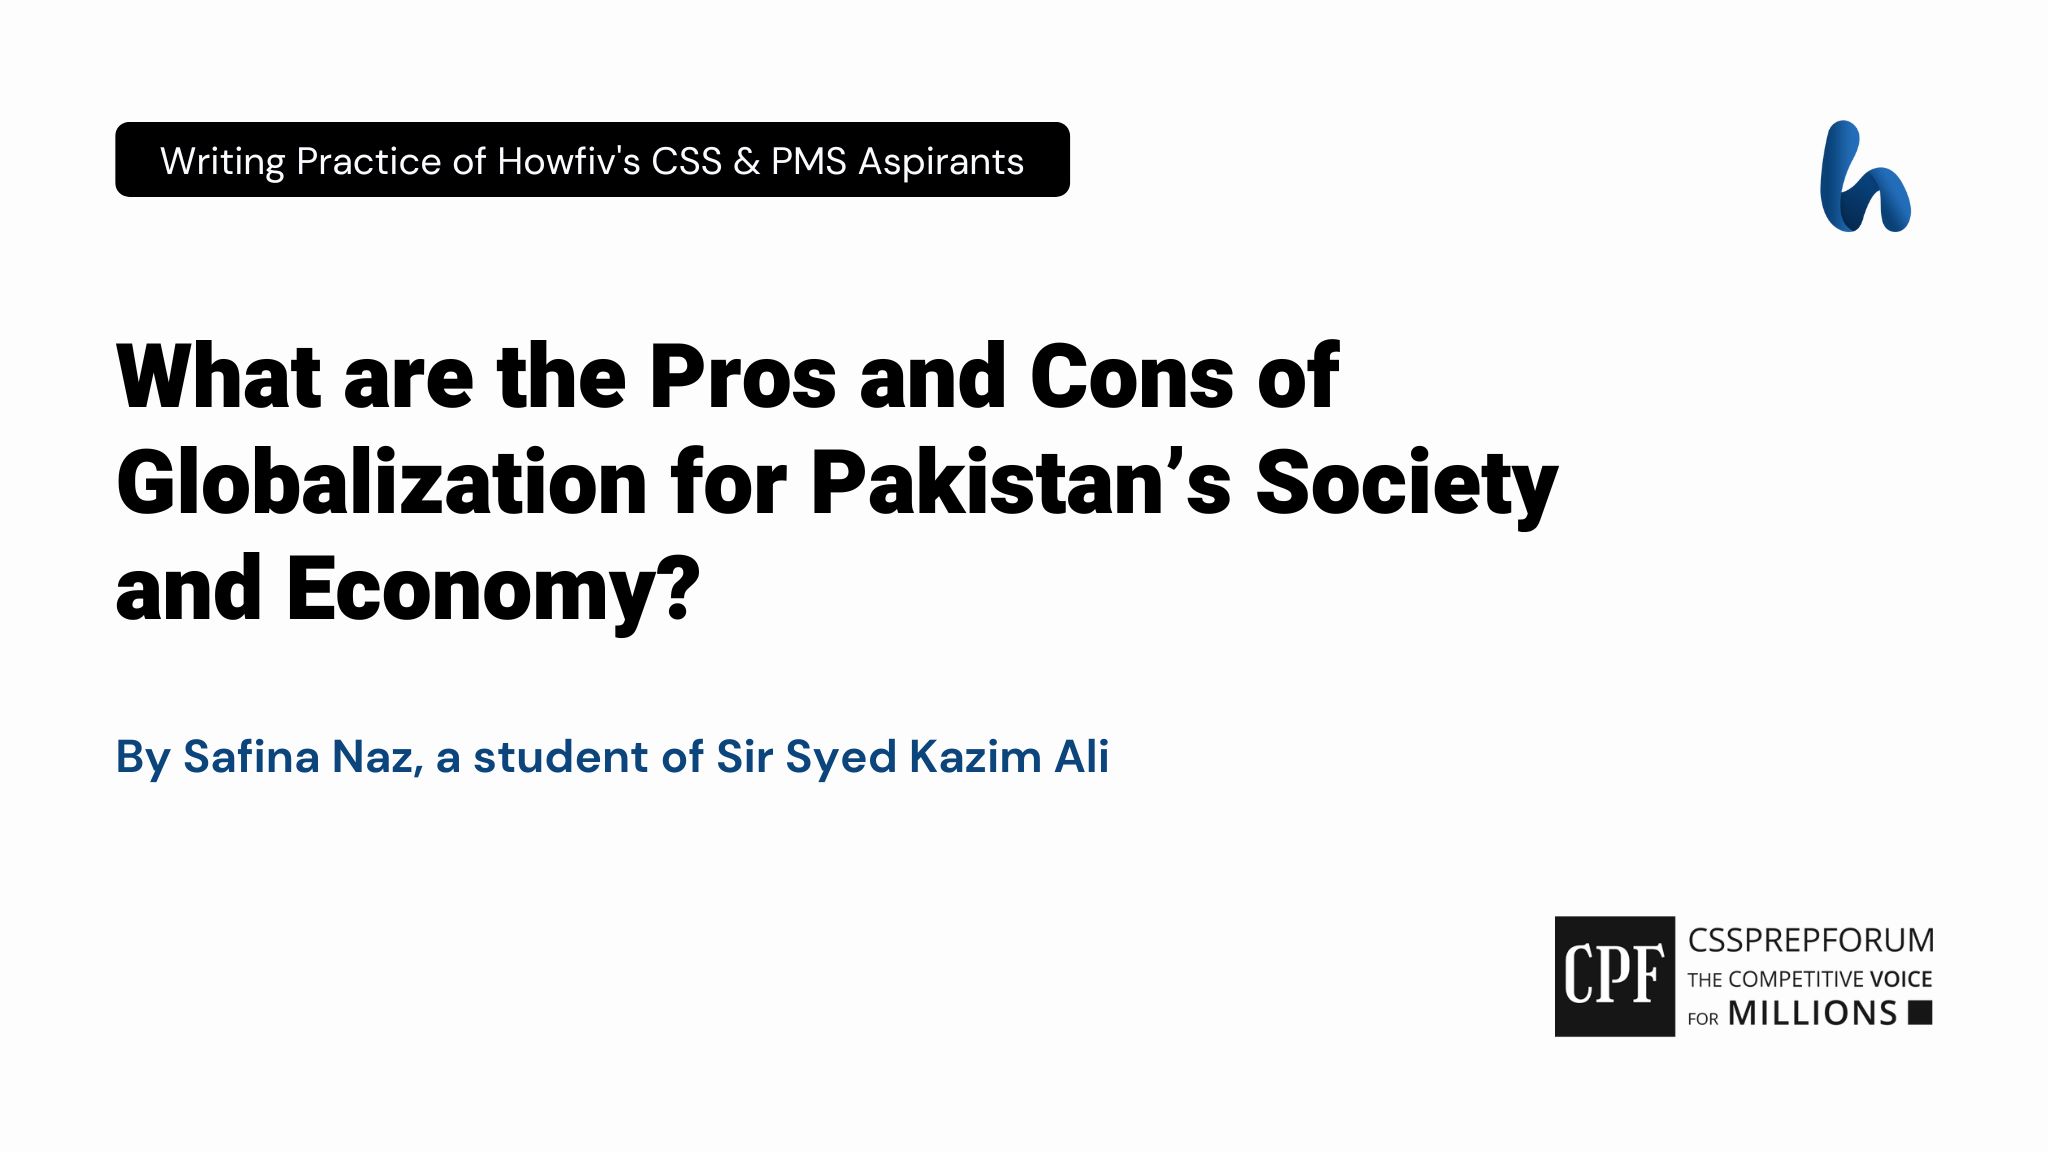 What are the Pros and Cons of Globalization for Pakistan’s Society and Economy by Safina Naz